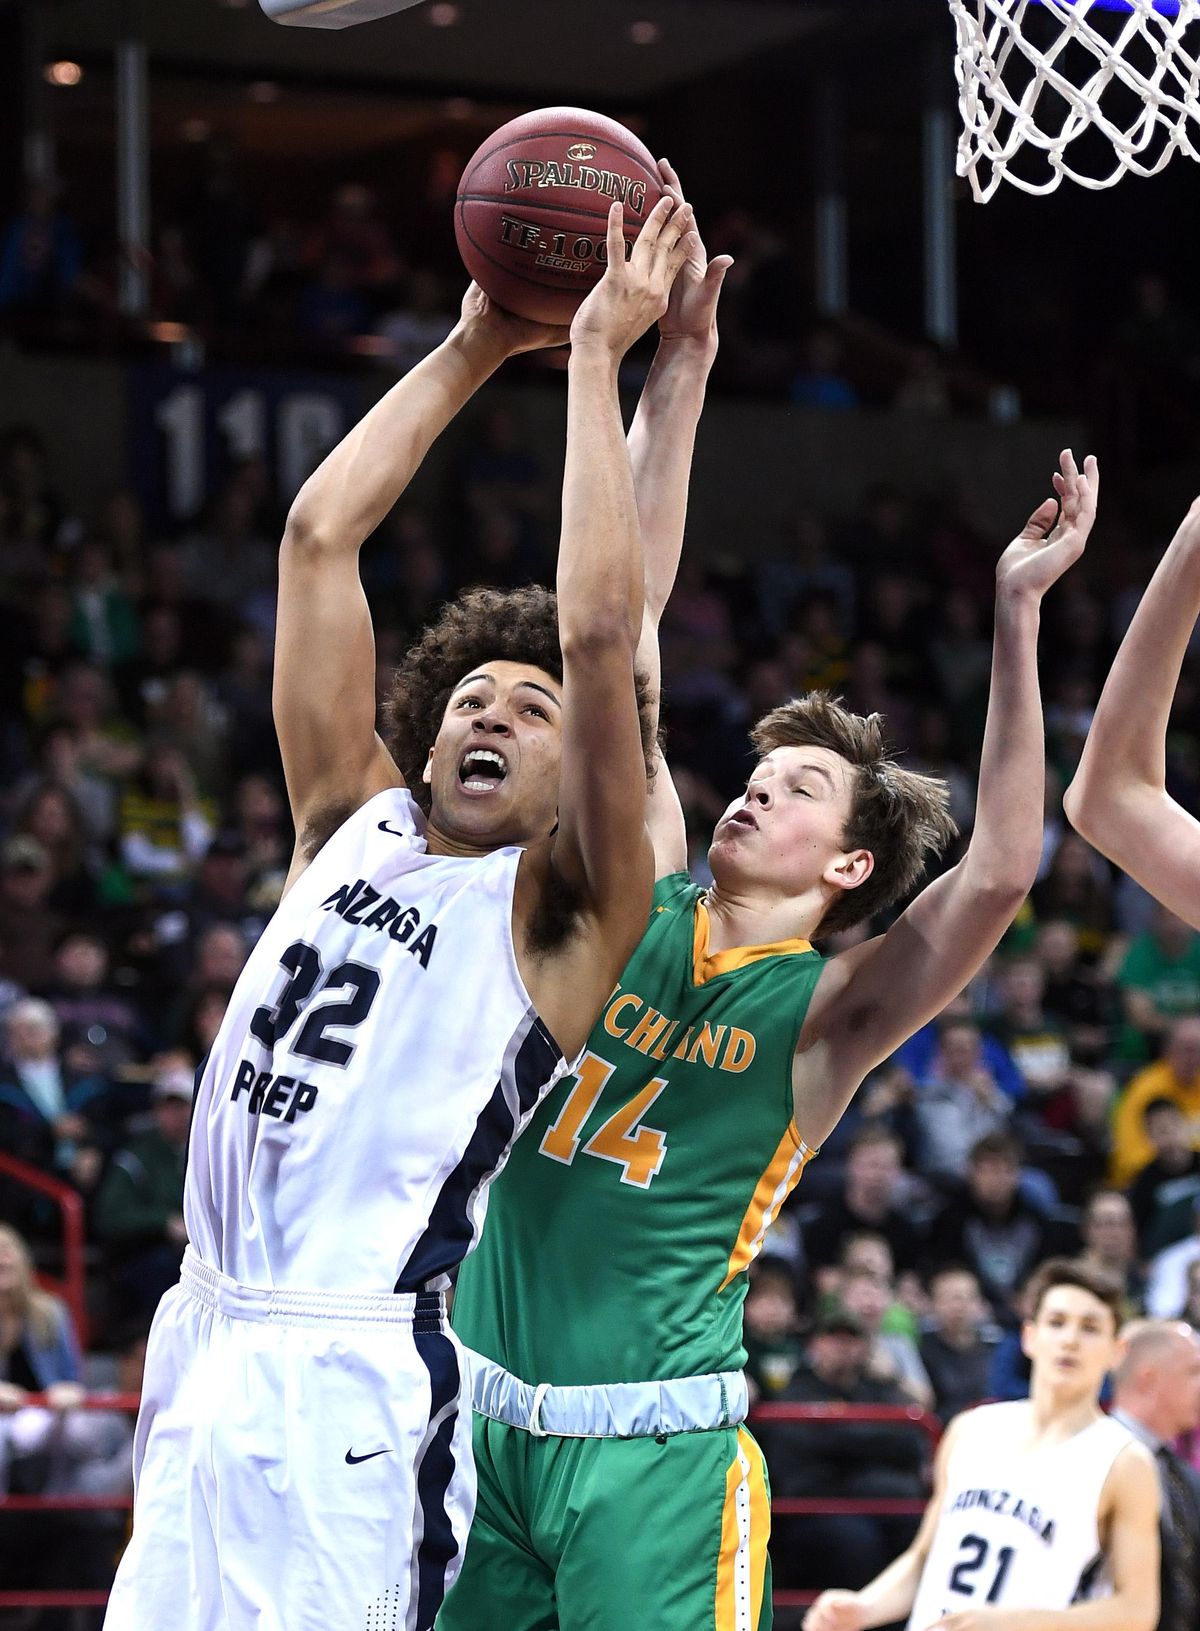 Gonzaga Prep’s Anton Watson drives as Richland’s Garrett Streufert defends during the District 8 4A title game last Friday  at the Spokane Arena. (Colin Mulvany / The Spokesman-Review)